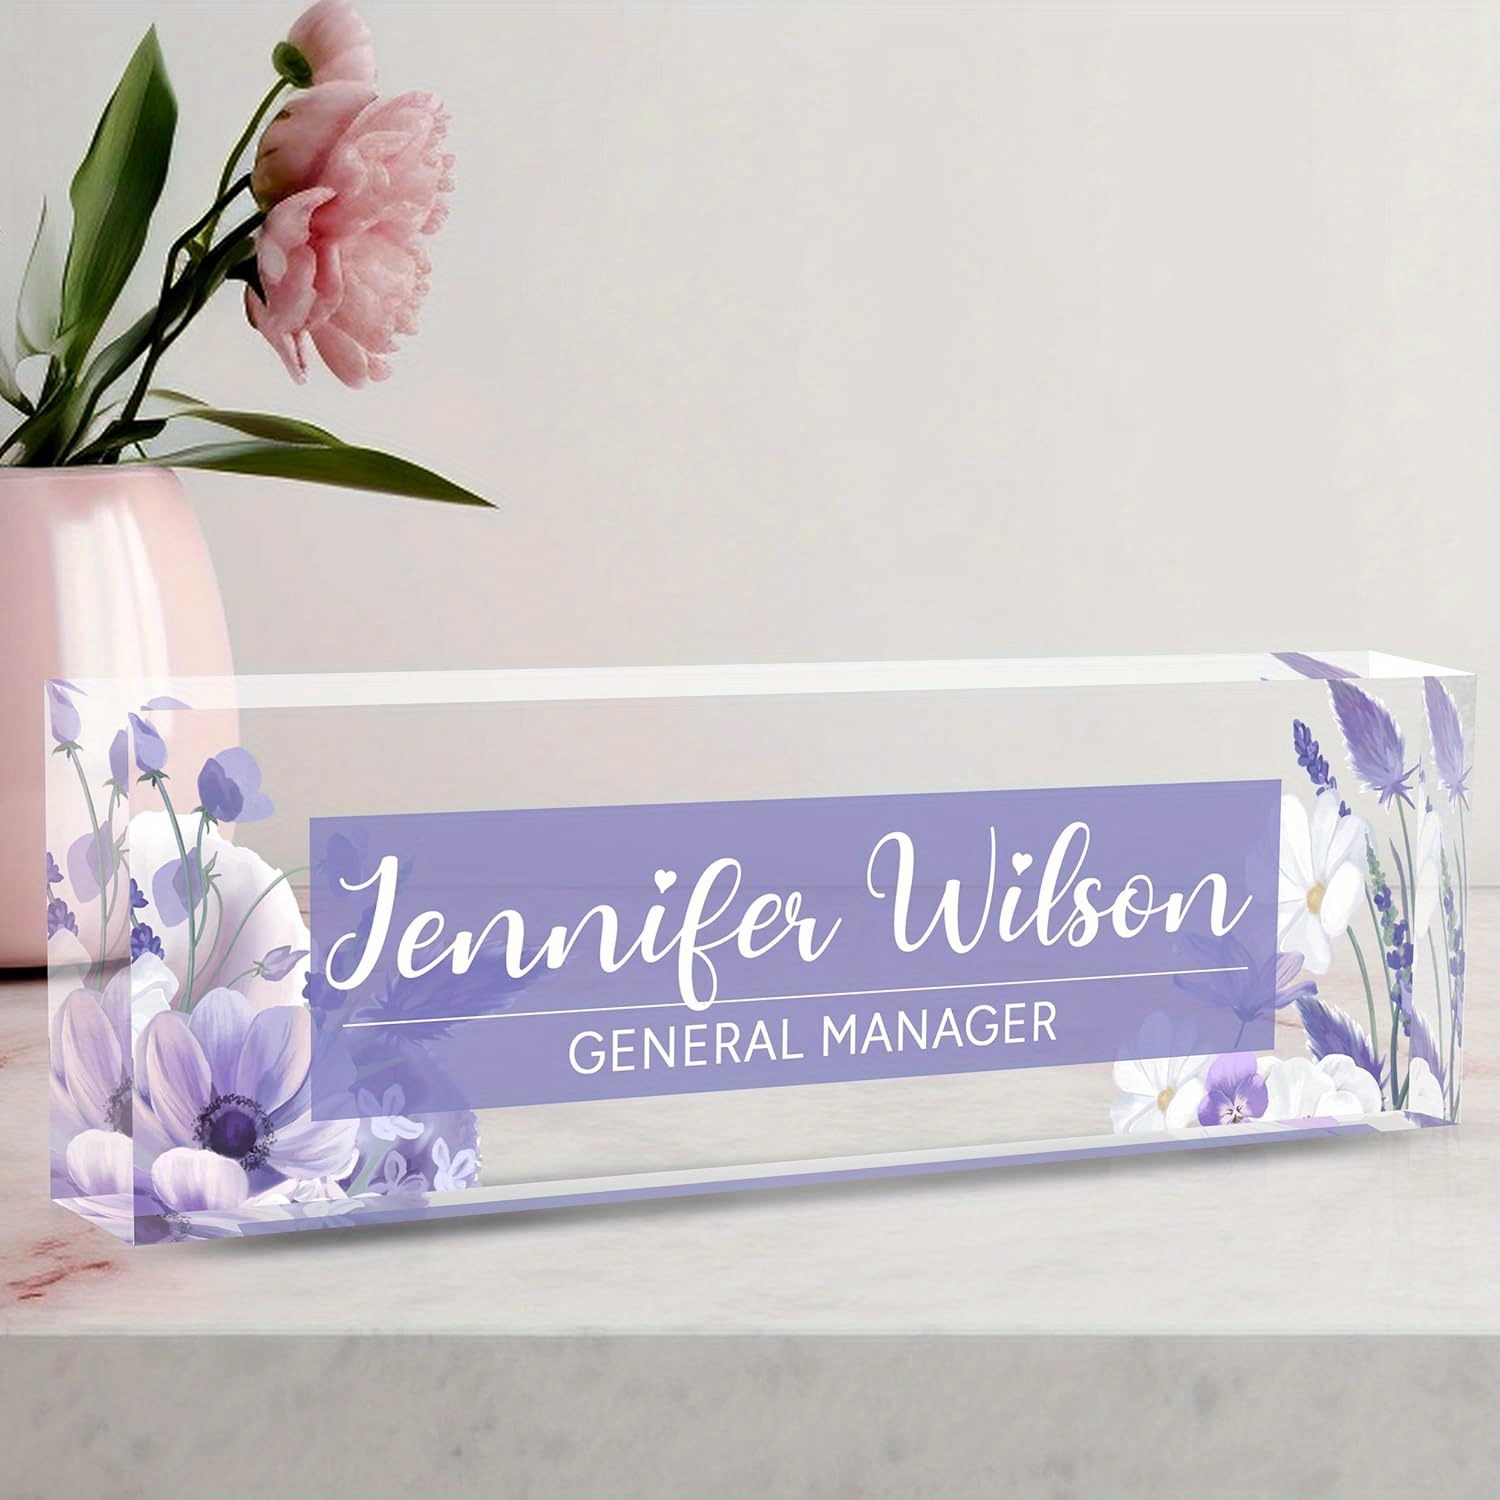 

Personalized Acrylic Desk Name Plate With Custom Text, Clear Tabletop Display For Office, Home - Multipurpose English Name Sign, Ideal For Boss, Manager, Teacher - Customizable Desk Plaque